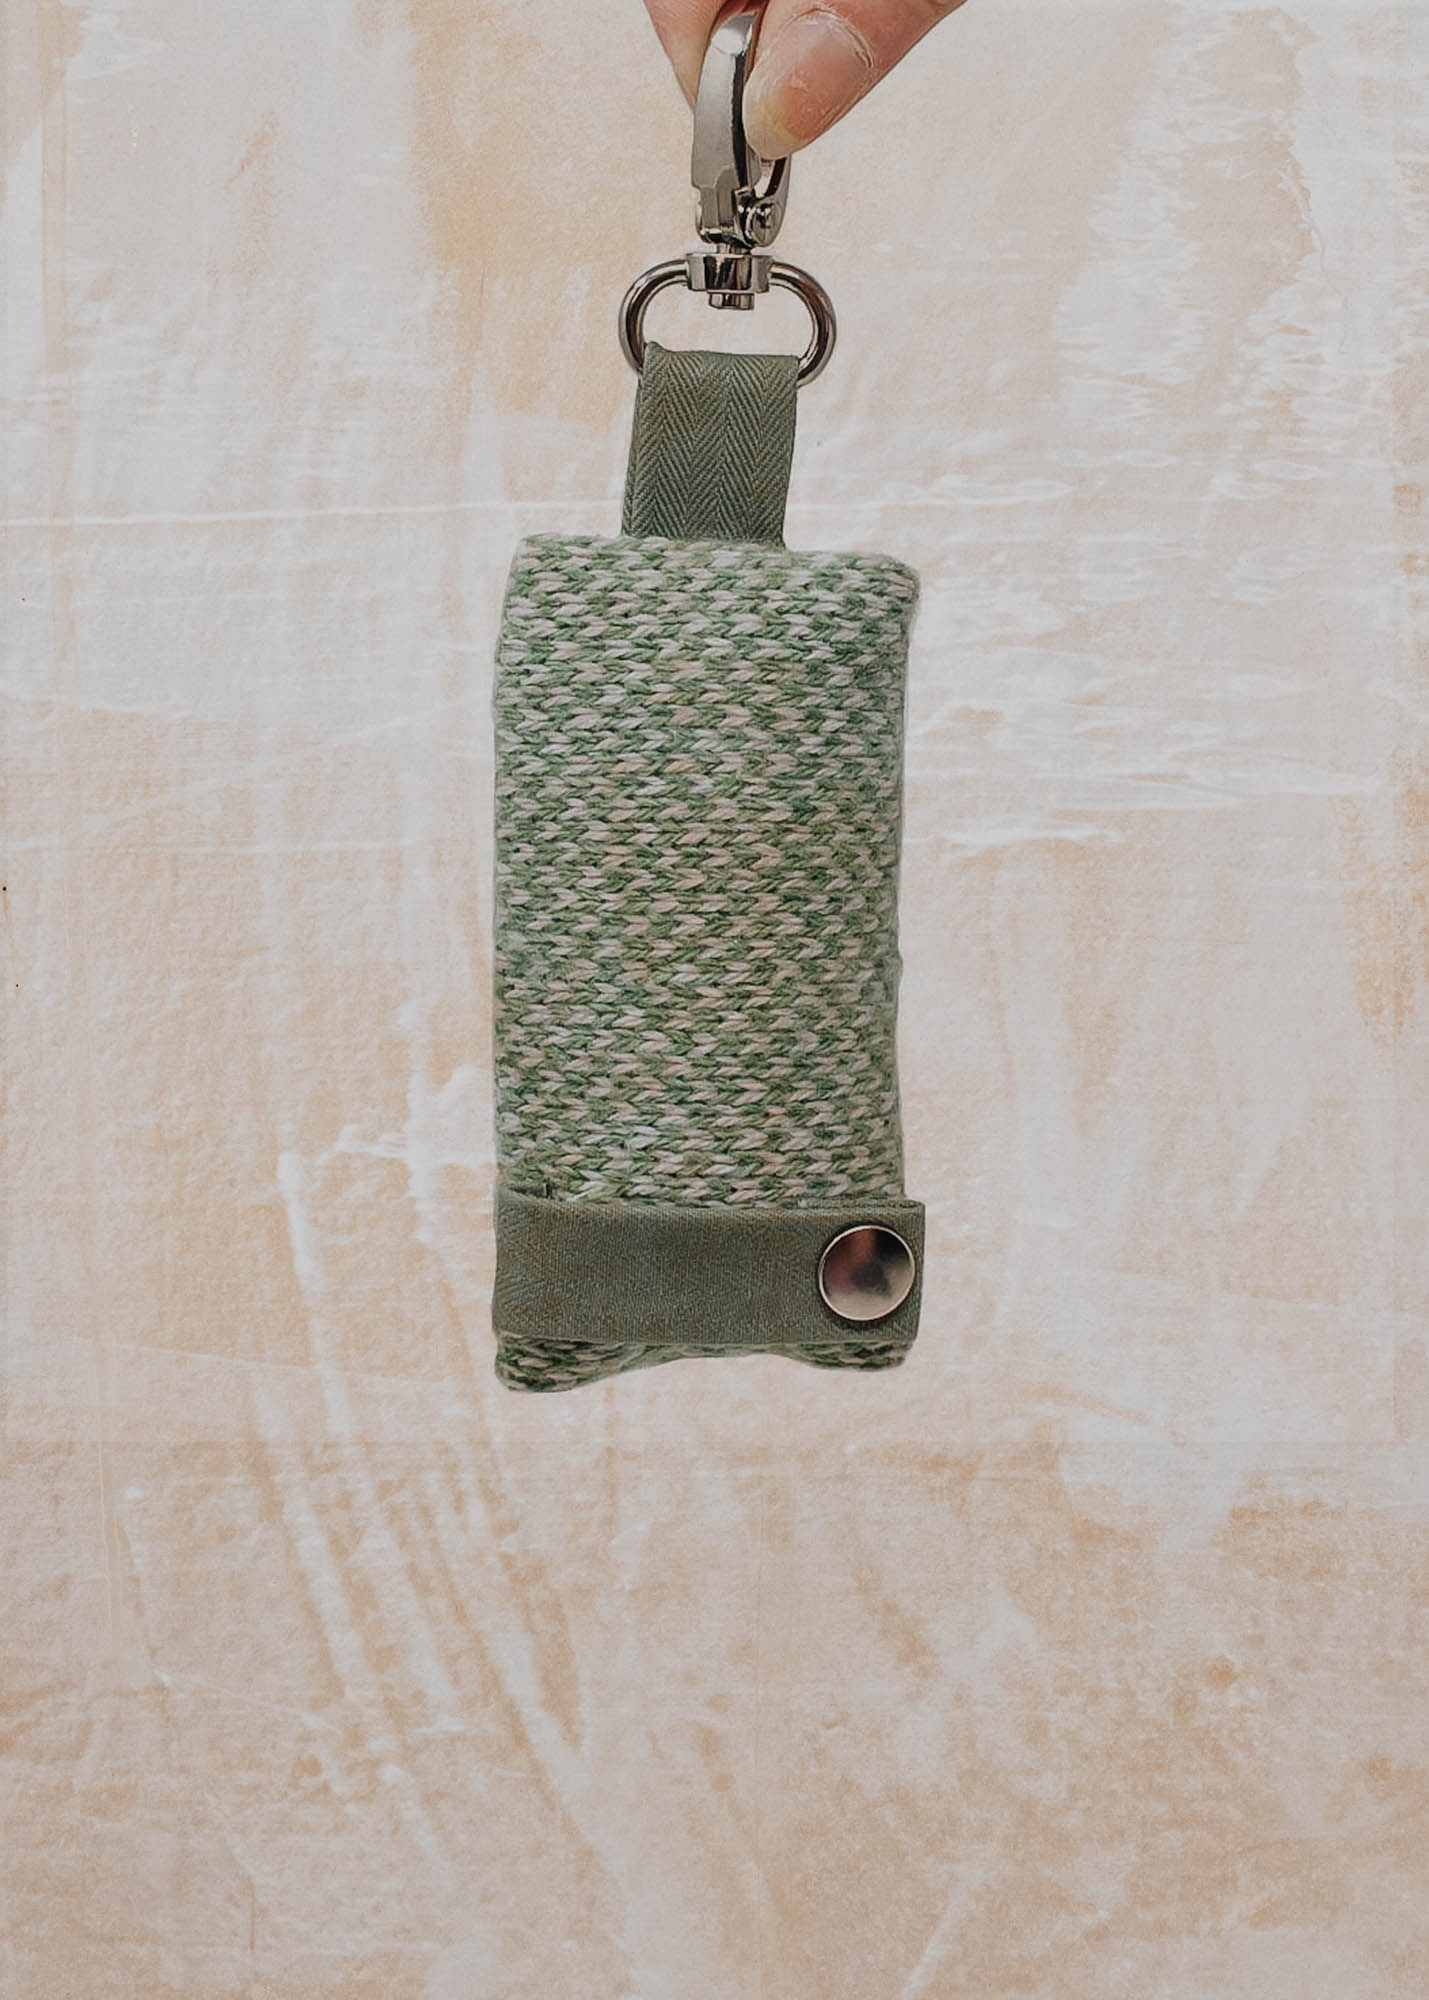 Stocky & Dee Dog Bag Holder in Green and Dove